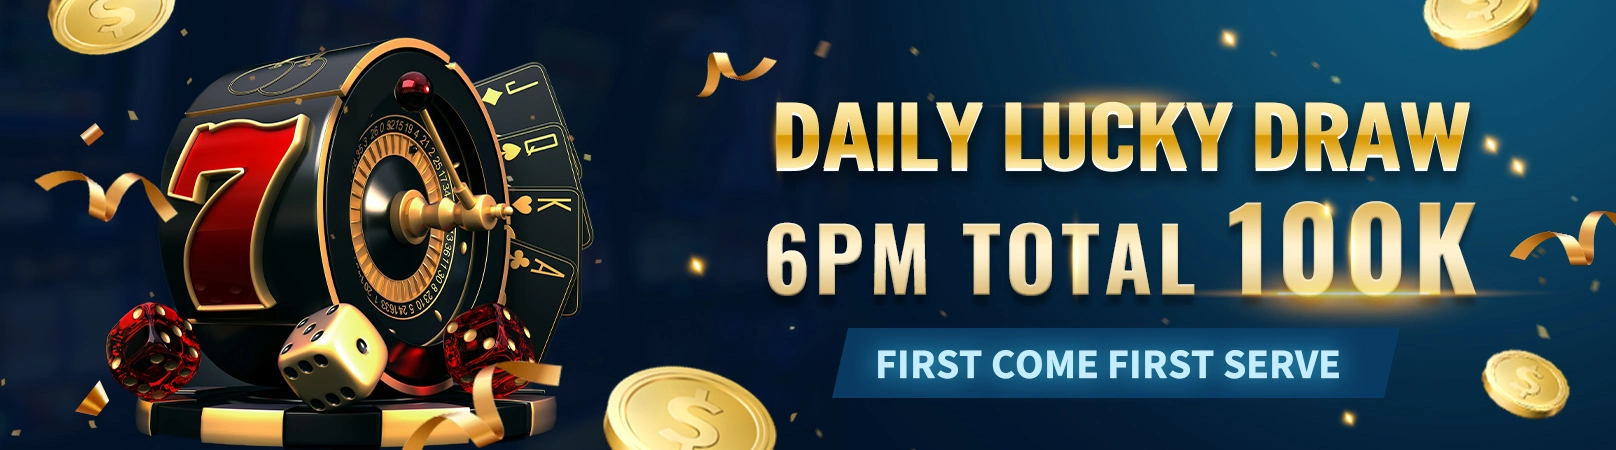 Daily lucky draw 6pm